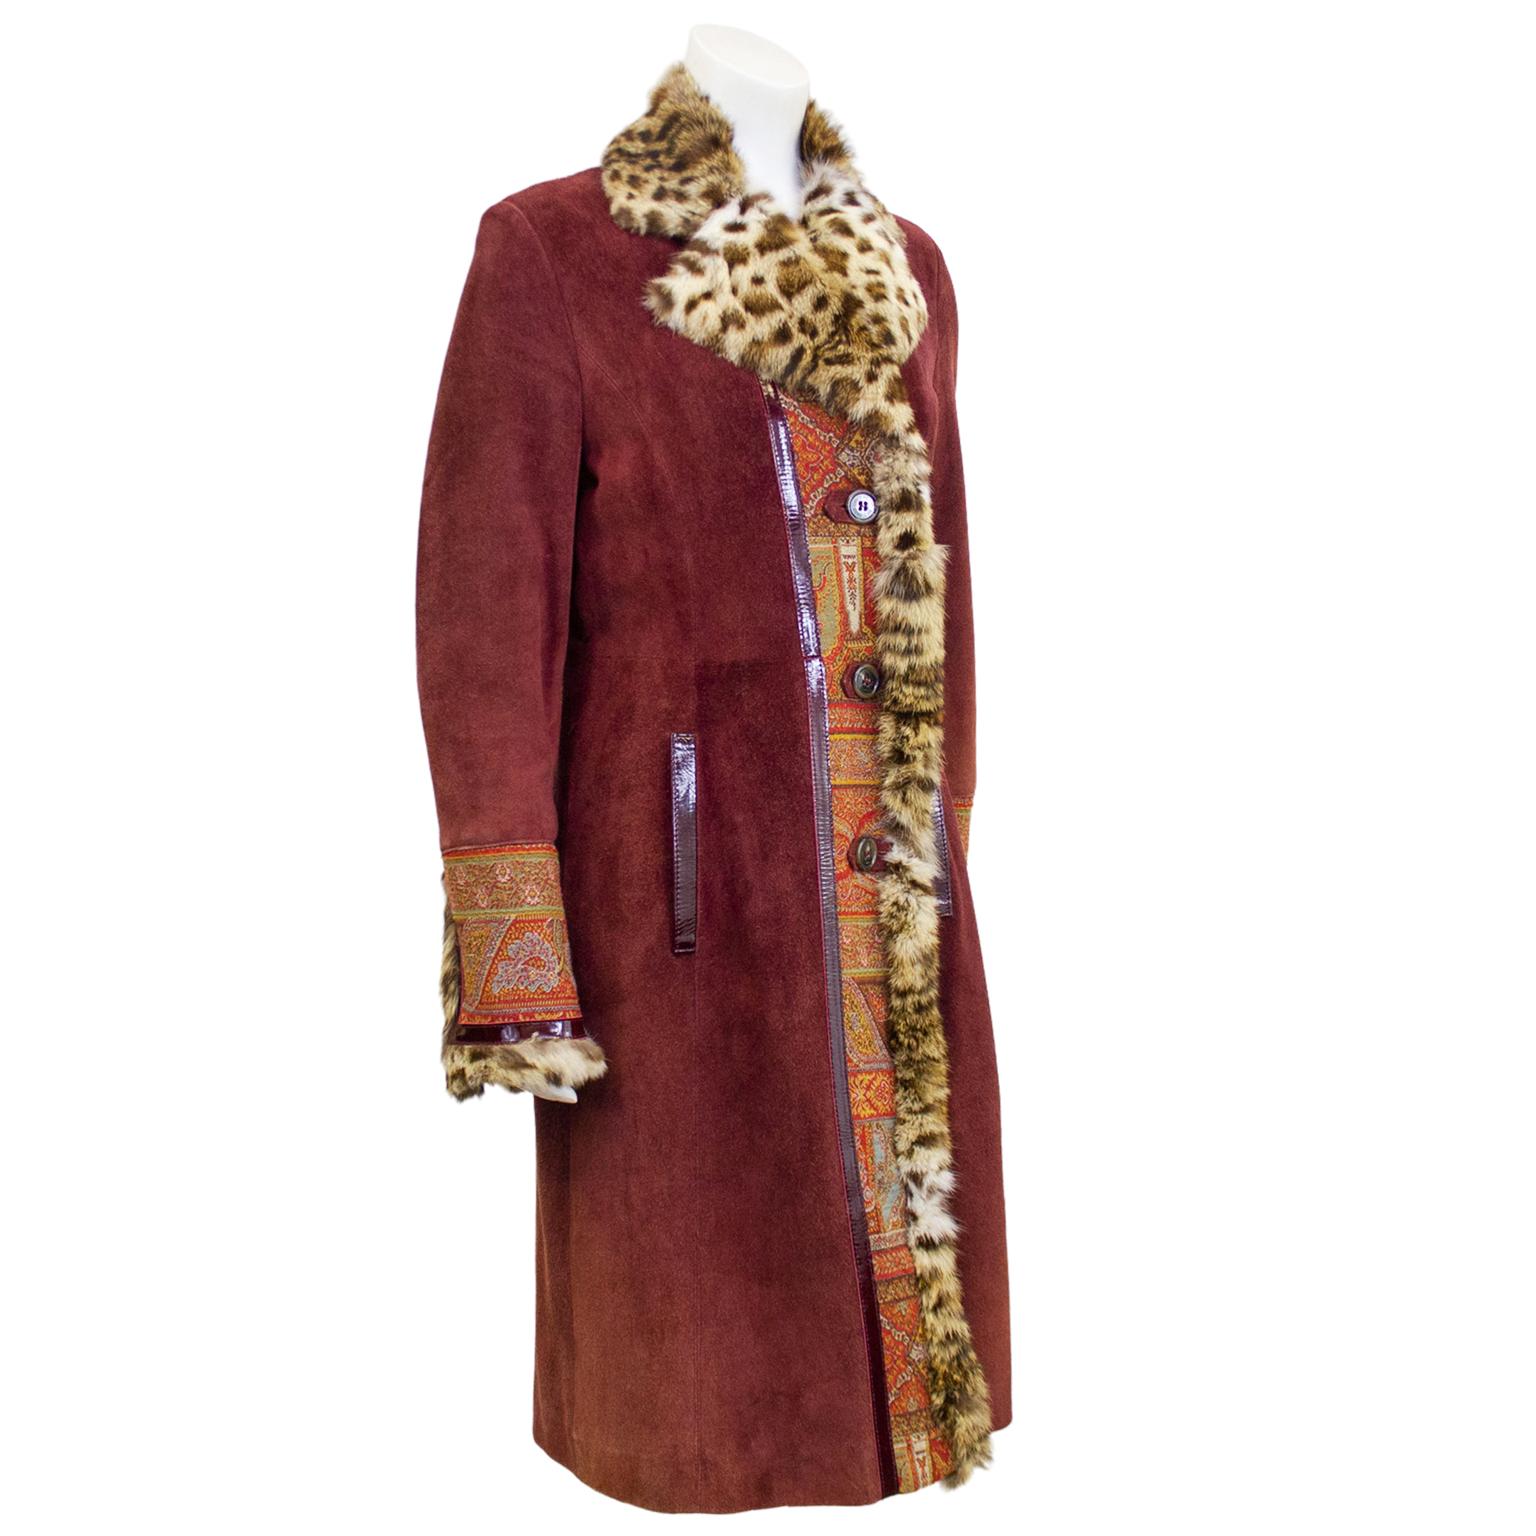 2000's Etro long coat. Burgundy suede with matching patent leather trim on the pockets cuffs and side seams on front and back. Show stopping detail is the faux stencilled fur notched collar, down the centre front and at cuffs. Additional details